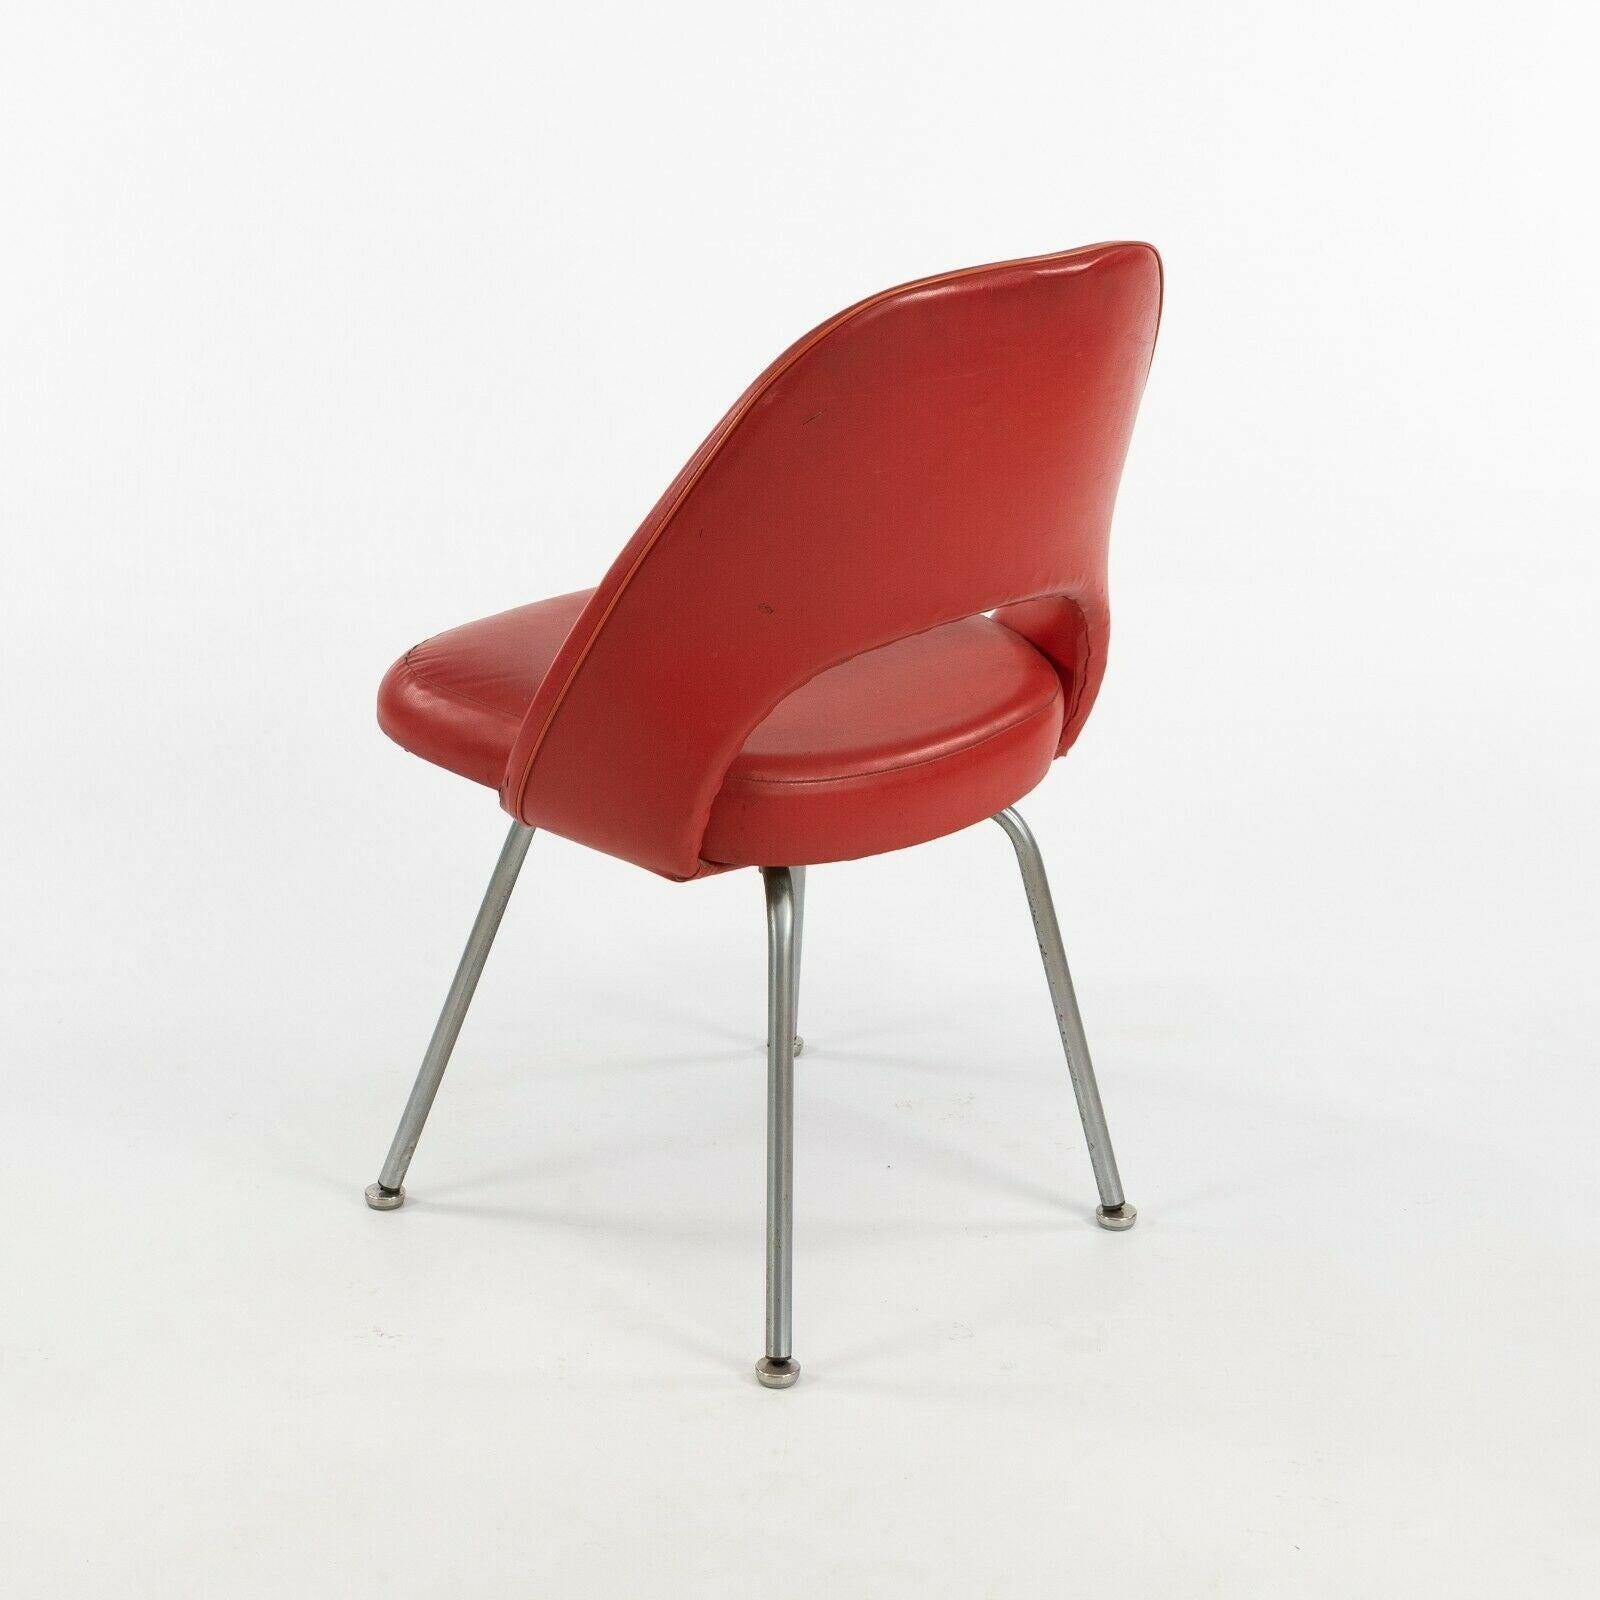 Mid-20th Century 1963 Pair of Eero Saarinen for Knoll Red Vinyl Armless Executive Dining Chairs For Sale